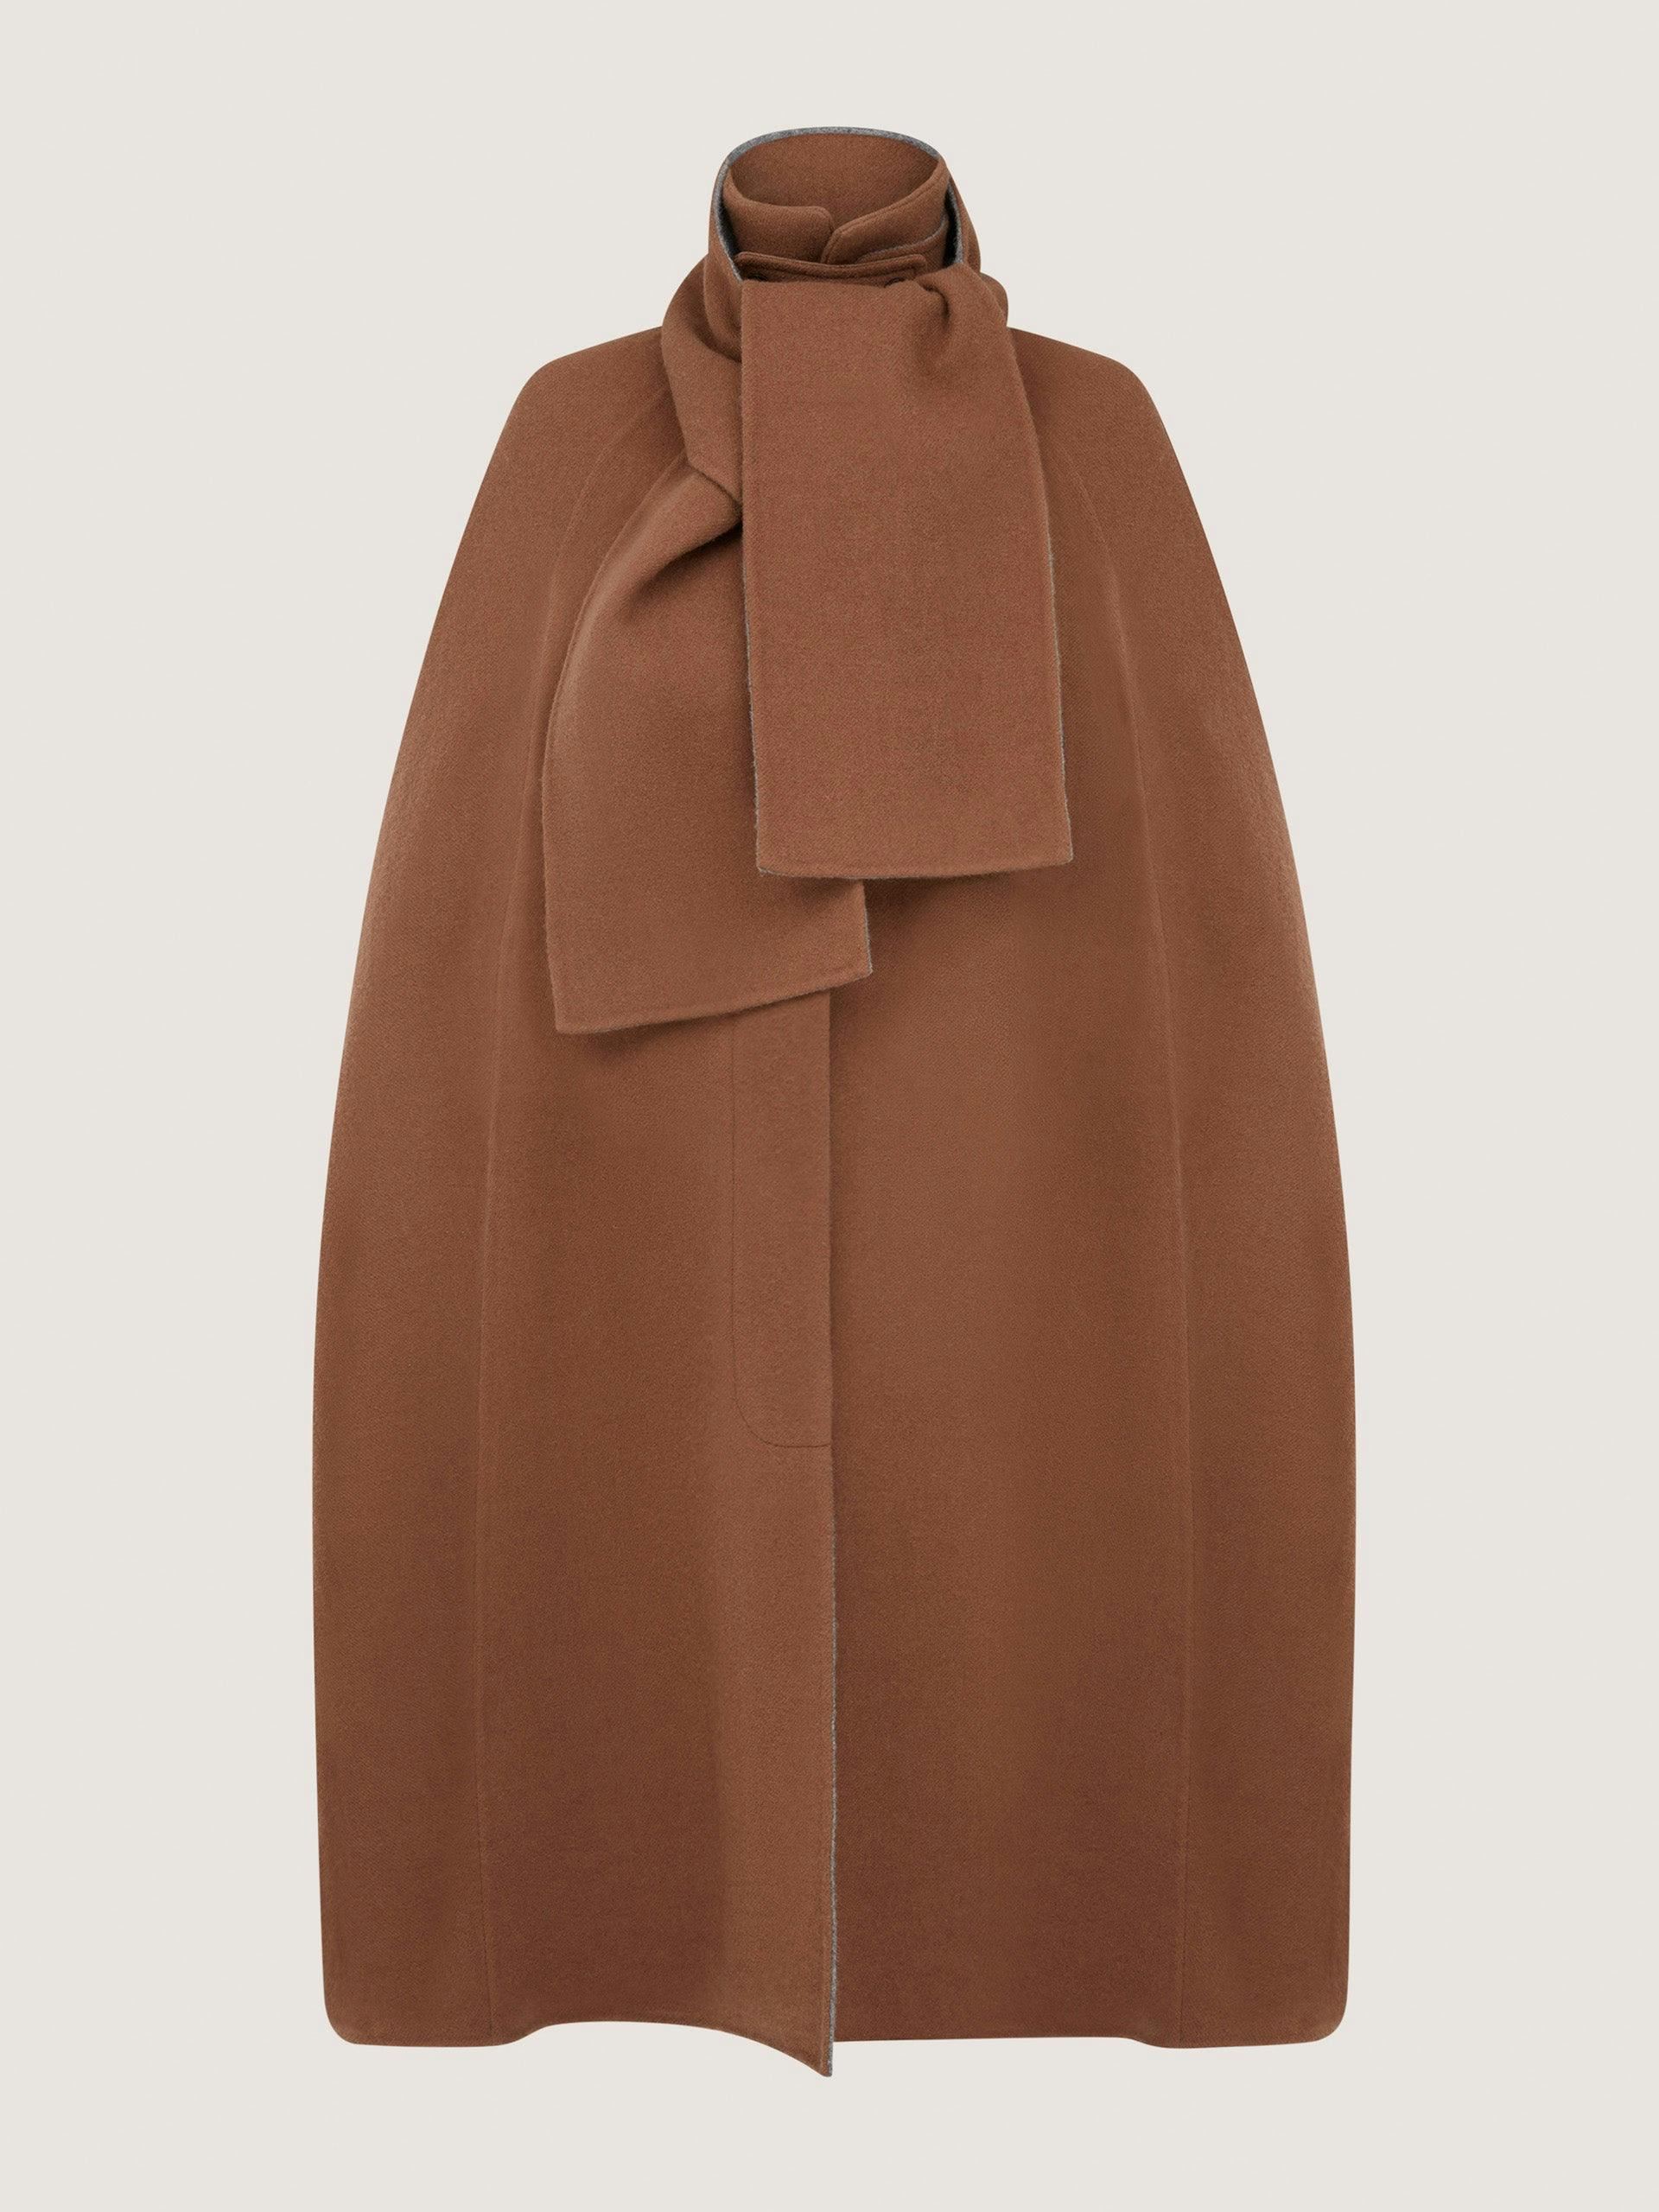 Wool cashmere trench cape